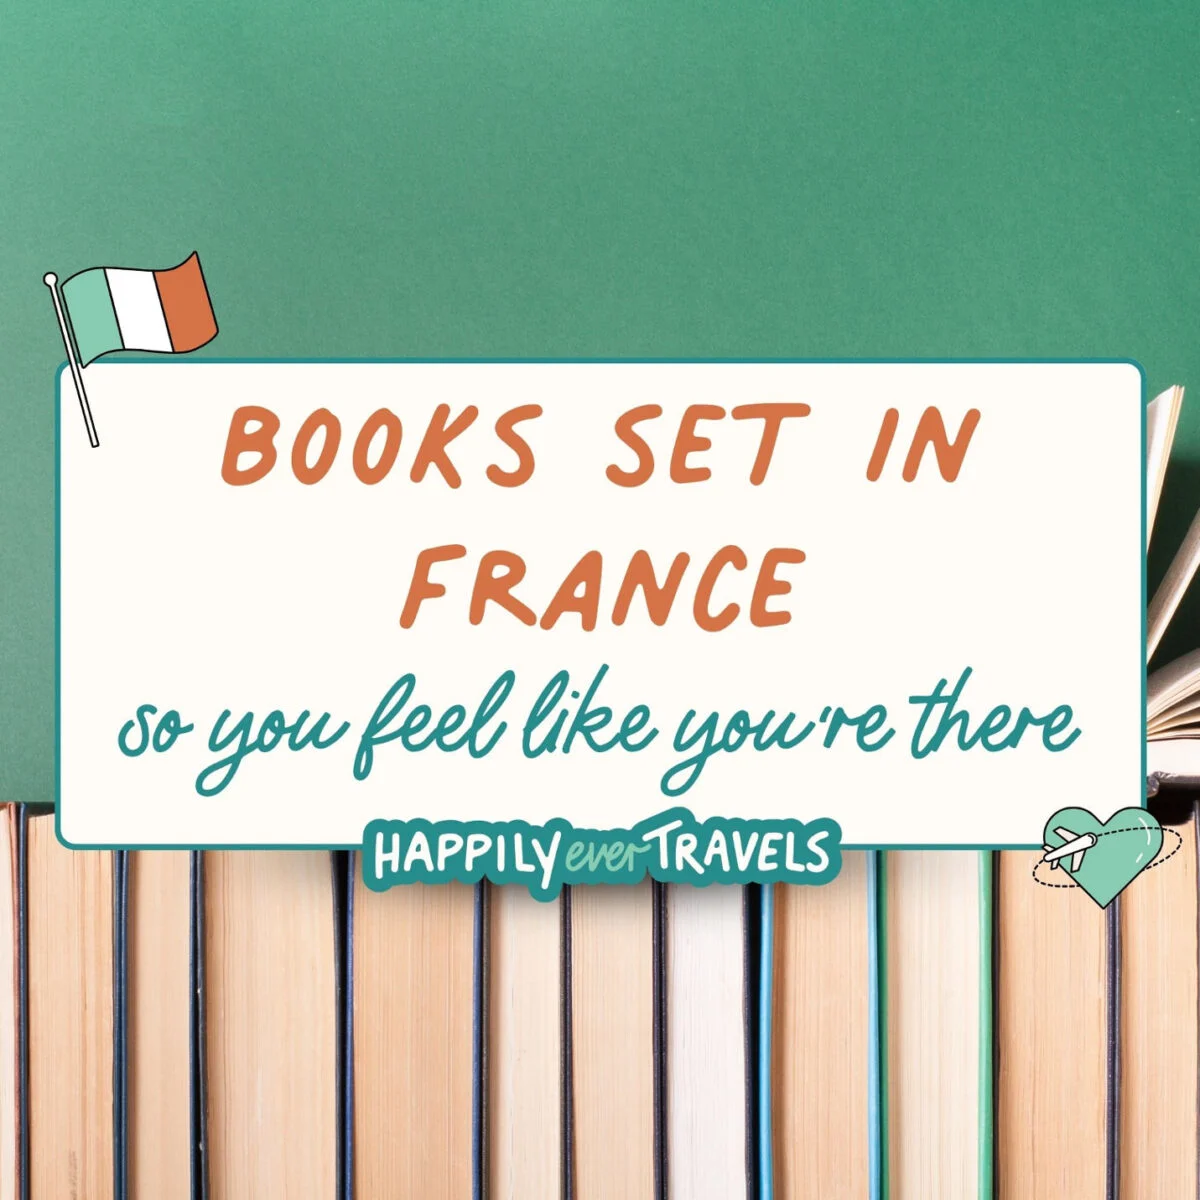 35 Books Set in France So You Feel Like You’re There